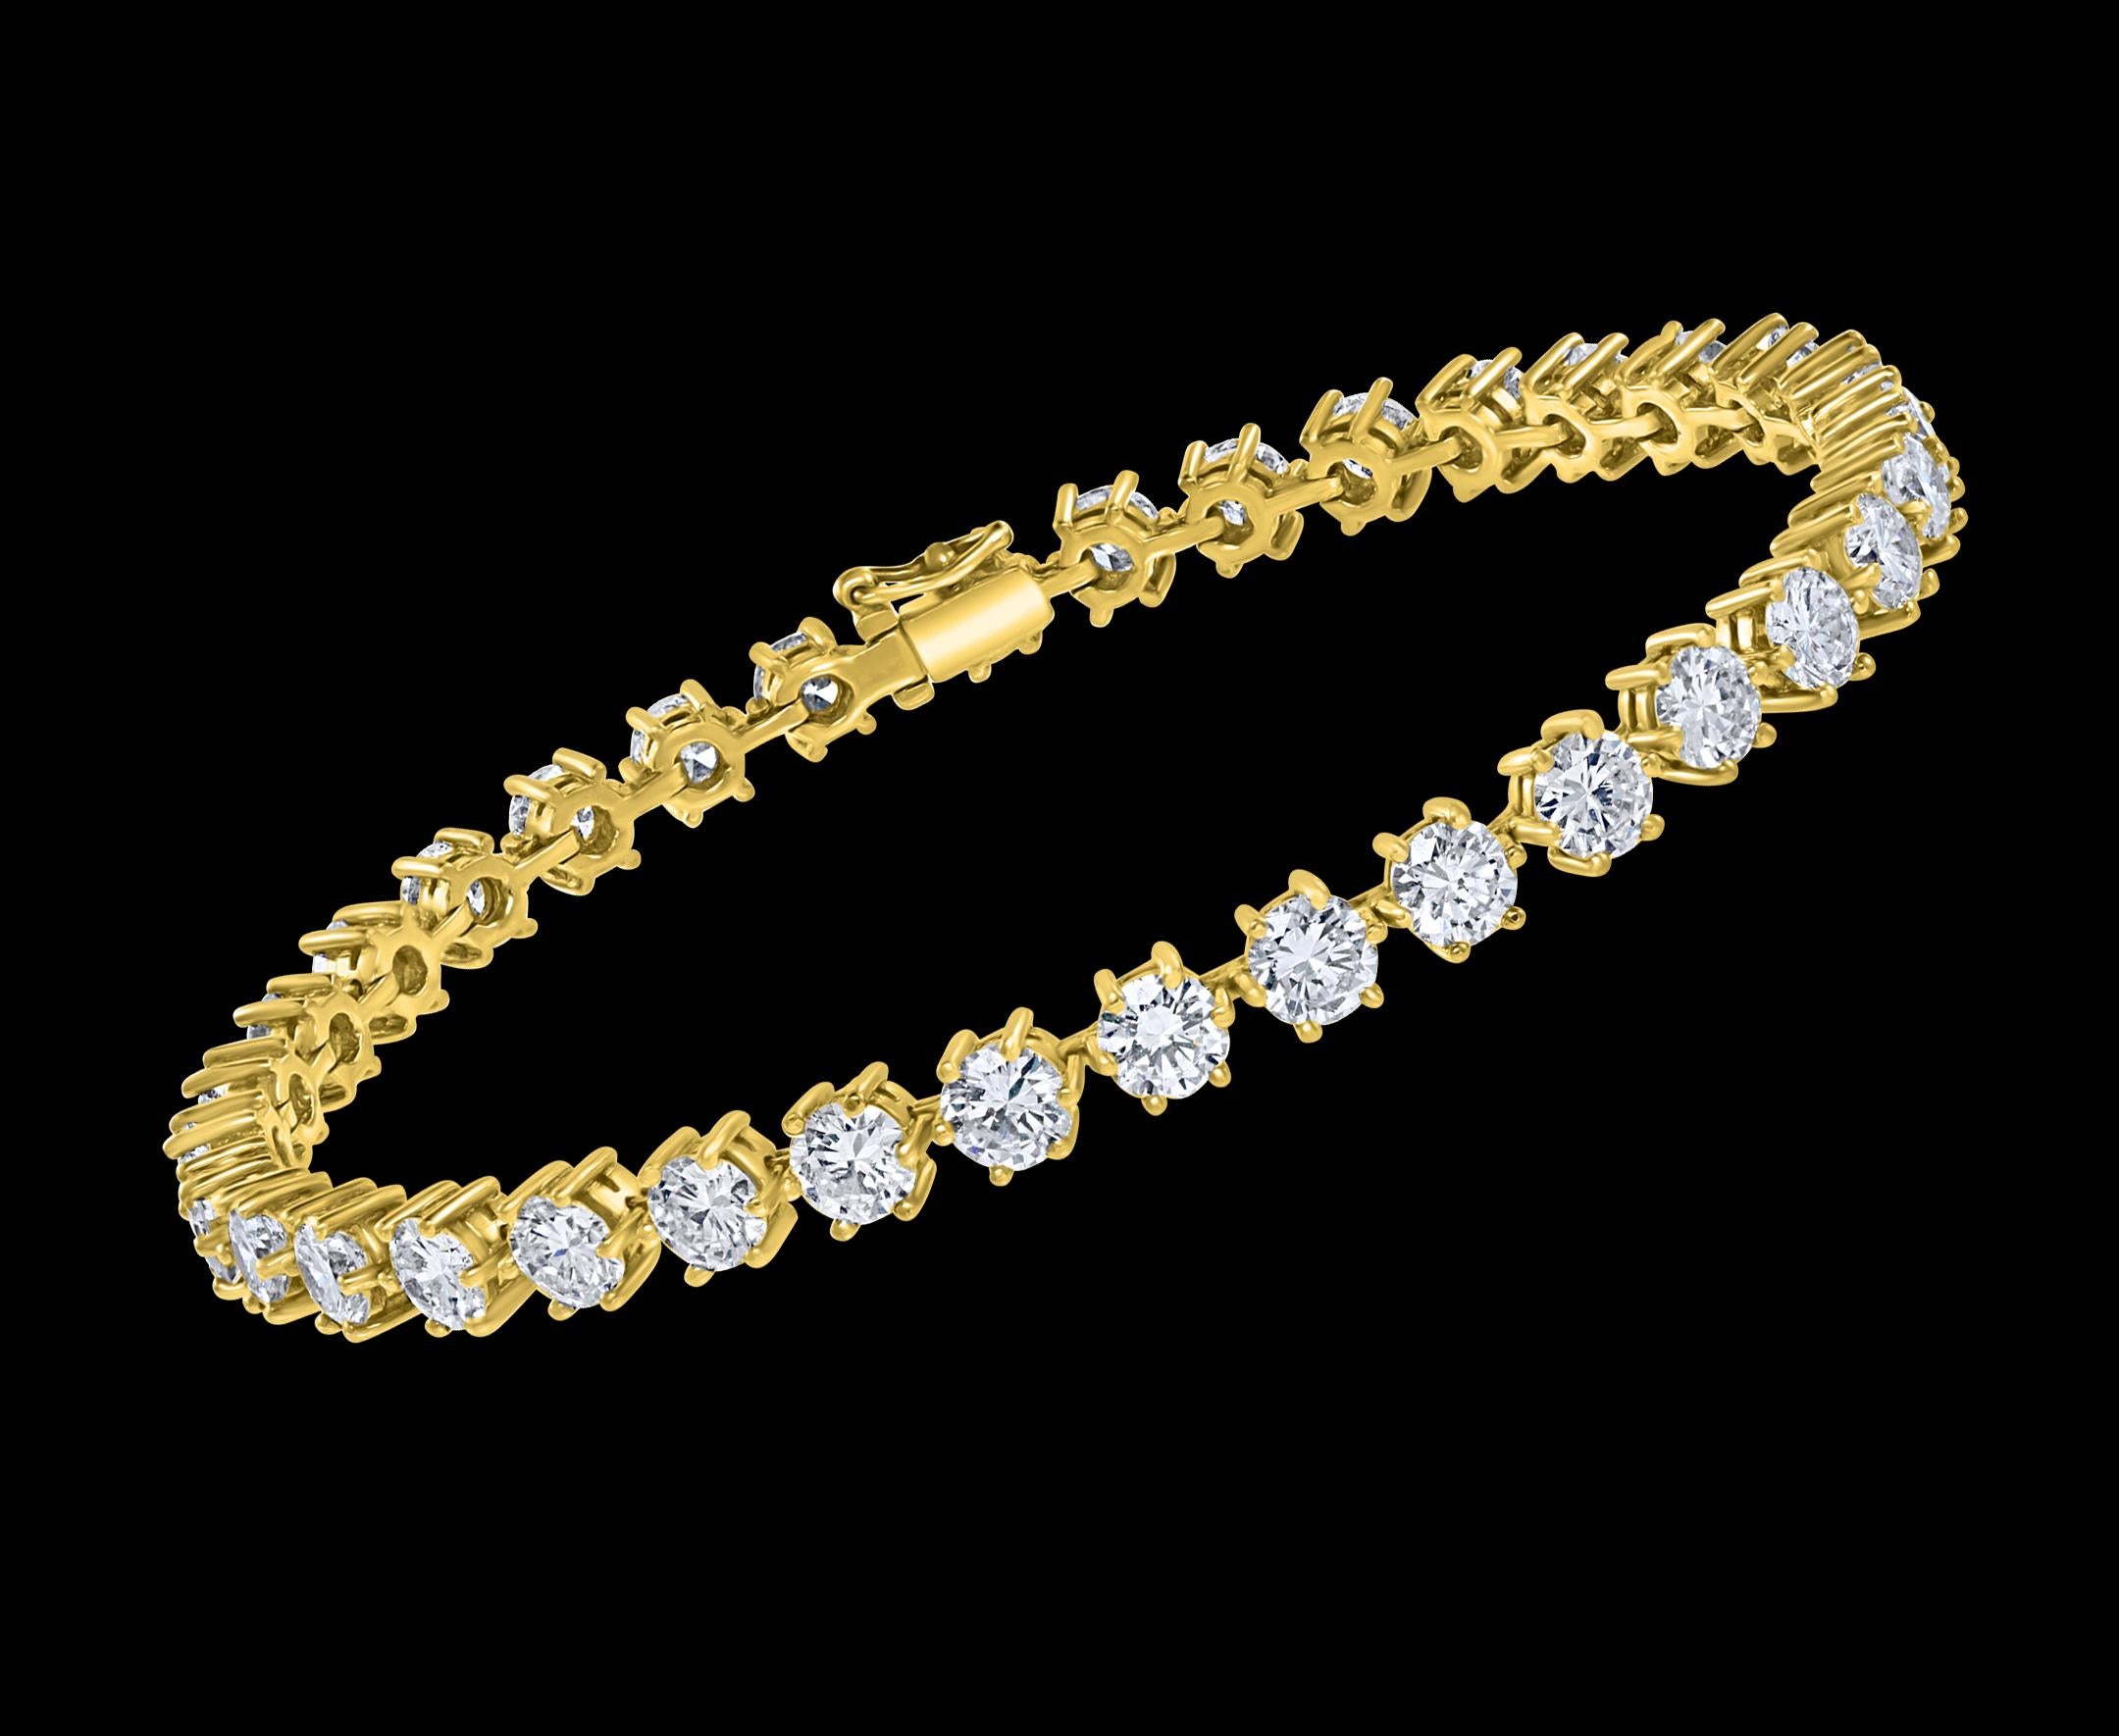 
34 Round Diamond 50 Pointer Each Tennis Bracelet in 18 K Yellow Gold 17 Ct Line Bracelet
Meet the ultimate bold tennis bracelet. The single row of prong set  Large Round Brilliant cut Diamonds.
50 pointer each , 34 Total pieces approximately 17